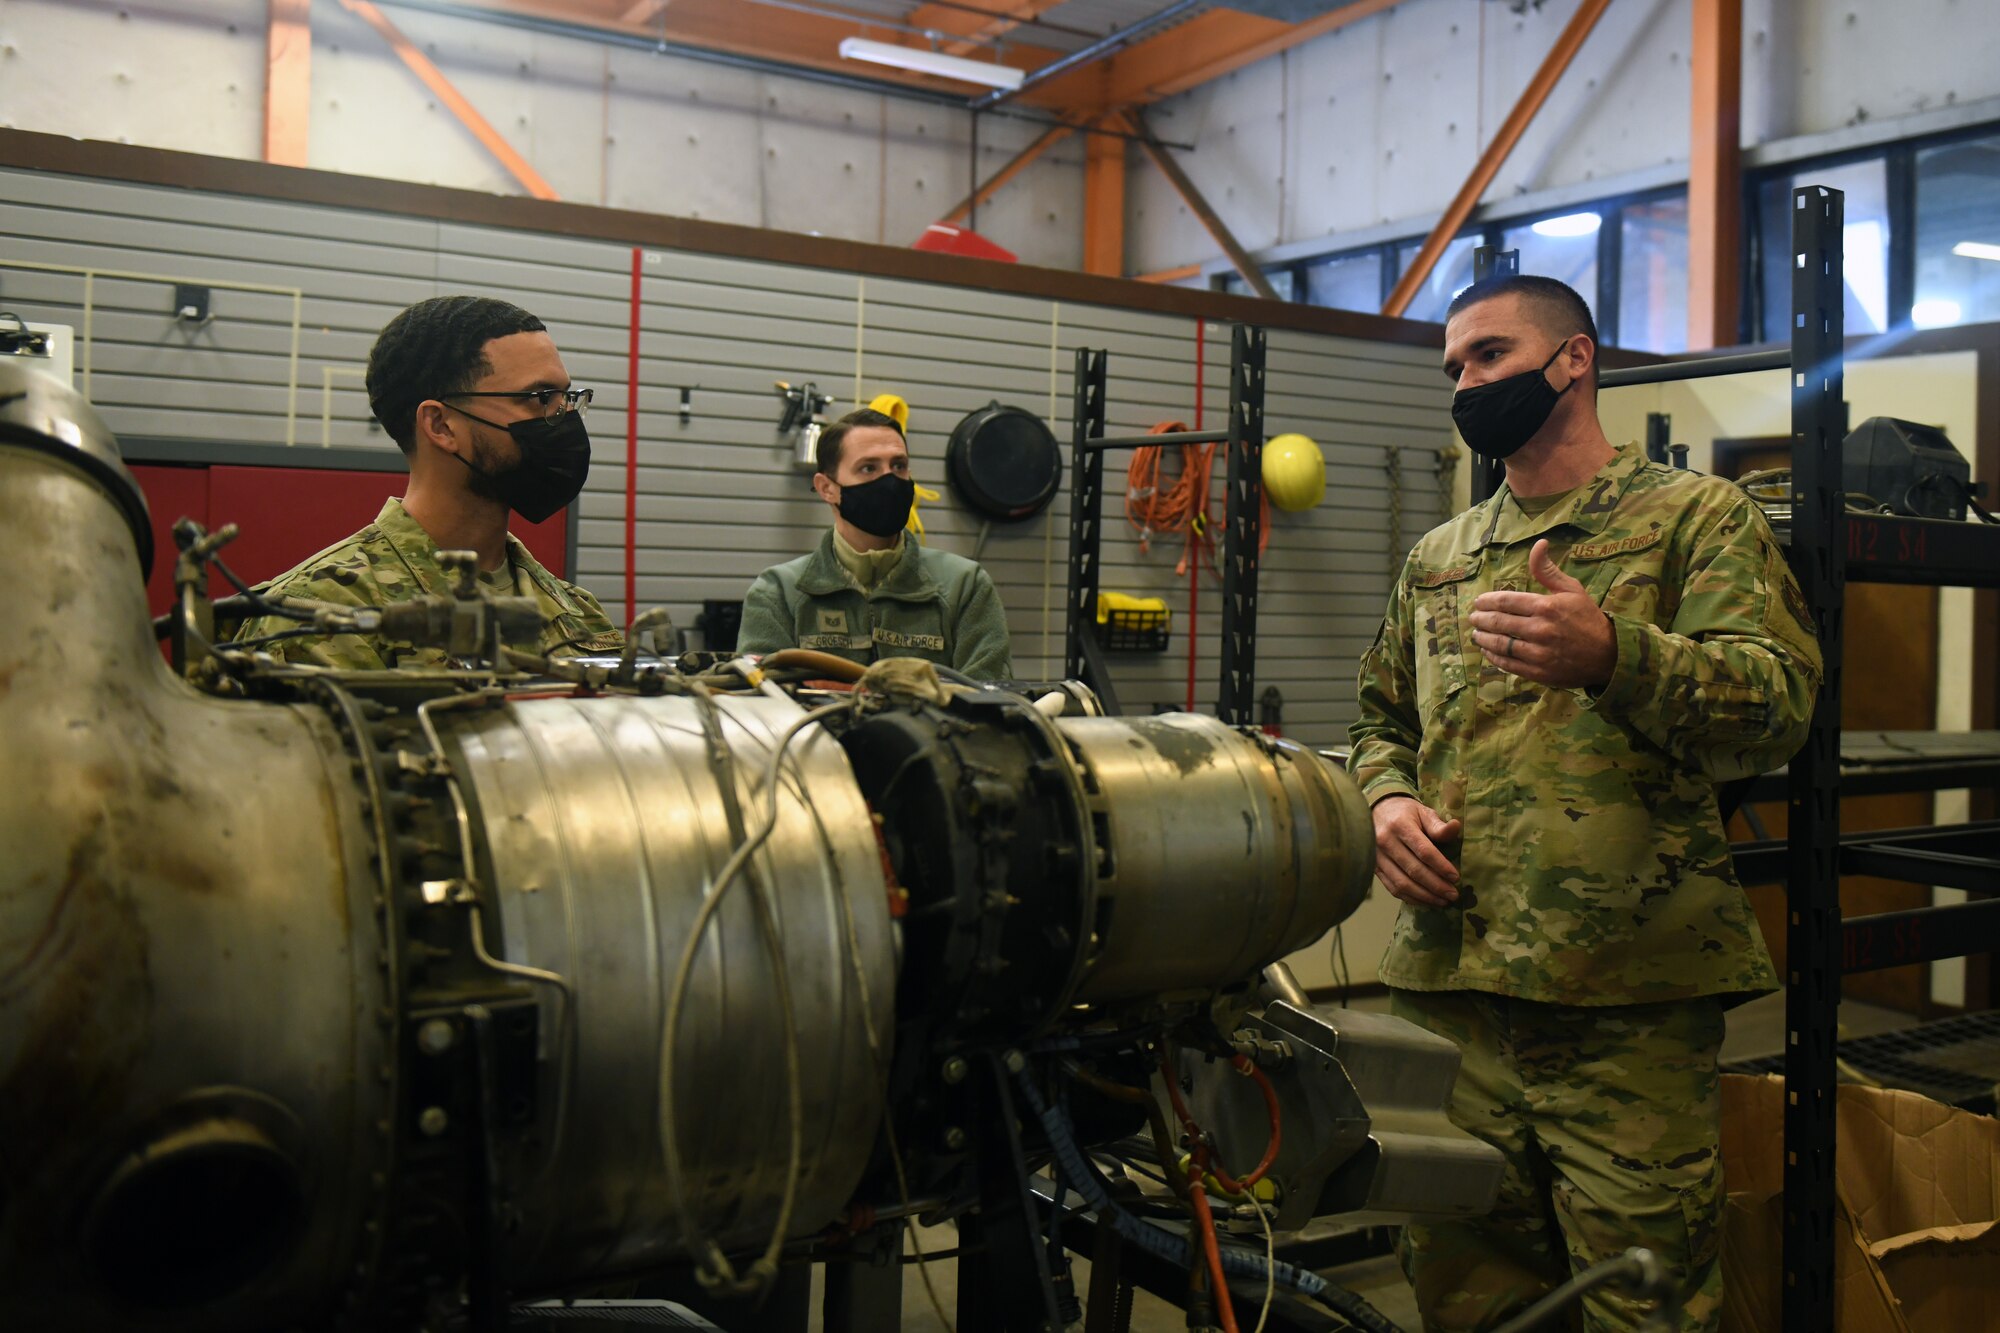 Senior Master Sgt. Matthew Parker, 349th Maintenance Group quality assurance superintendent, right, explains components and operation of an auxiliary power unit gas turbine compressor to Airmen assigned to Beale Air Force Base, Feb. 16, 2021, at Travis Air Force Base, California. The Airmen visited Travis to learn about the various components on different types of aircraft. (U.S. Air Force photo by Airman 1st Class Luis A. Ruiz-Vazquez)